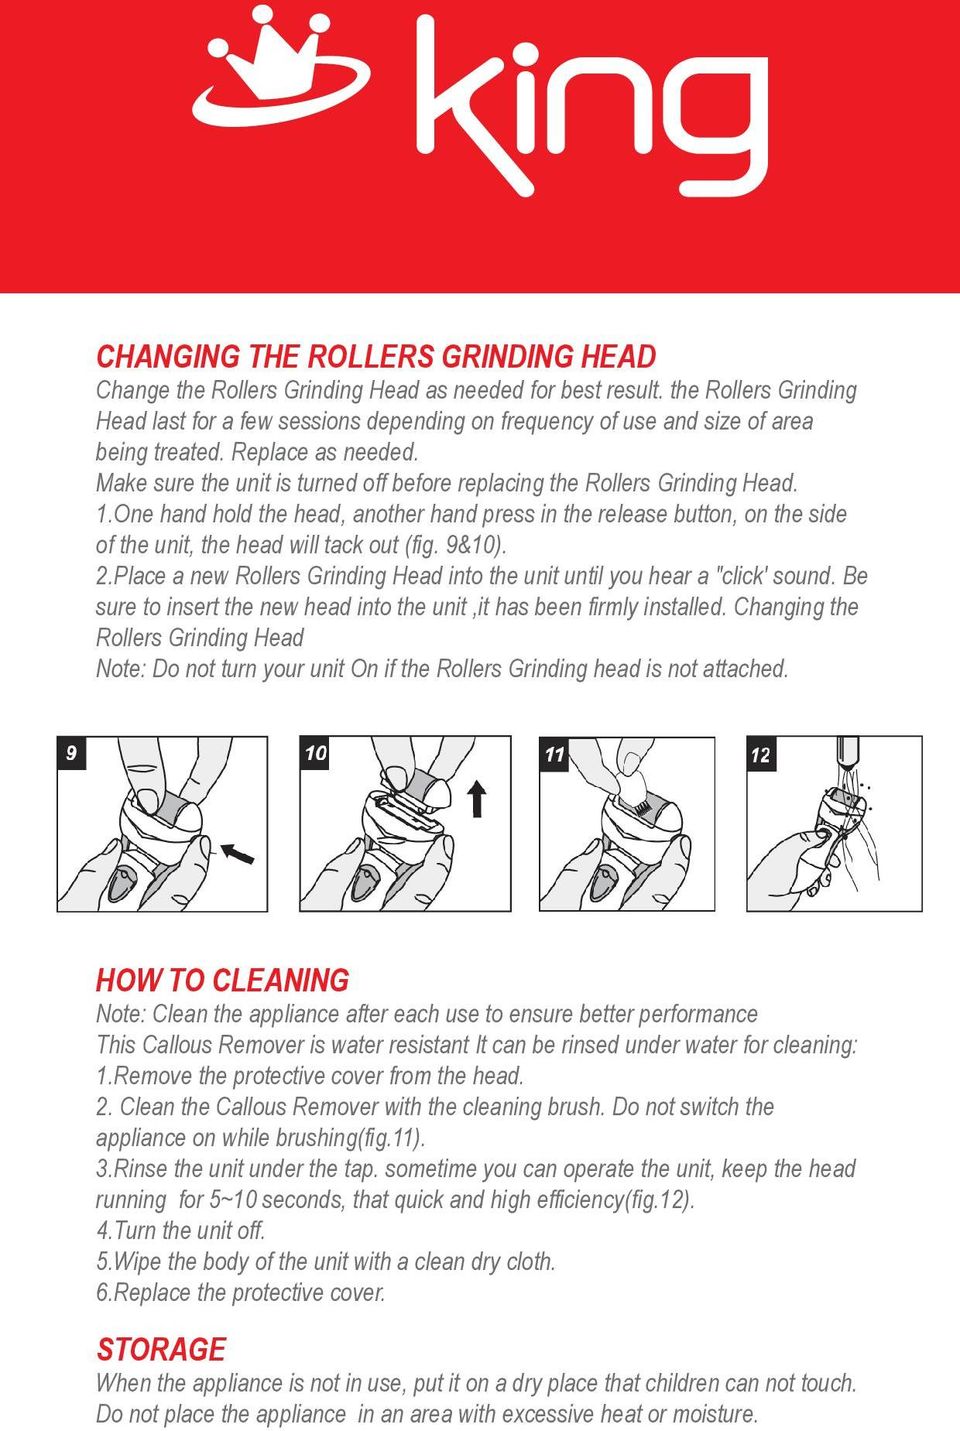 Make sure the unit is turned off before replacing the Rollers Grinding Head. 1.One hand hold the head, another hand press in the release button, on the side of the unit, the head will tack out (fig.